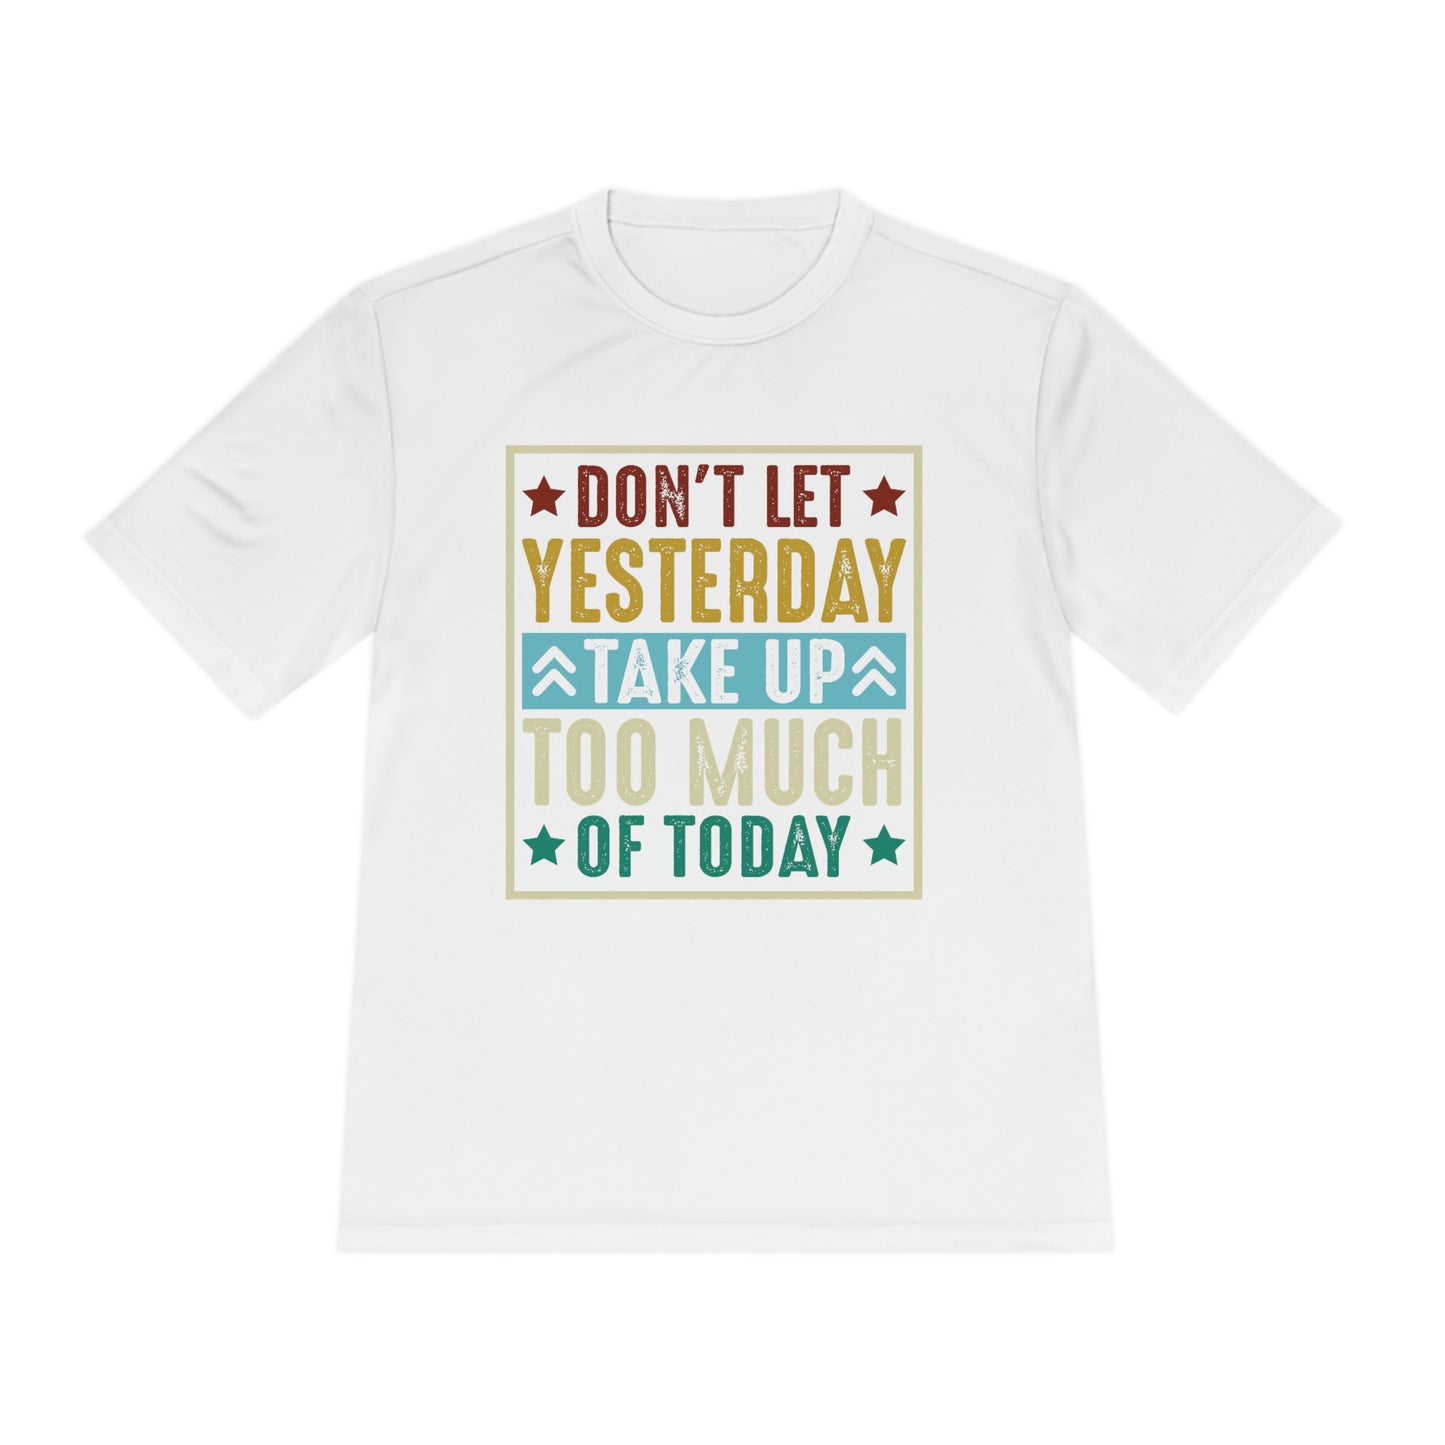 Don't dwell on the past unique tshirt.  Motivational shirt for men or women